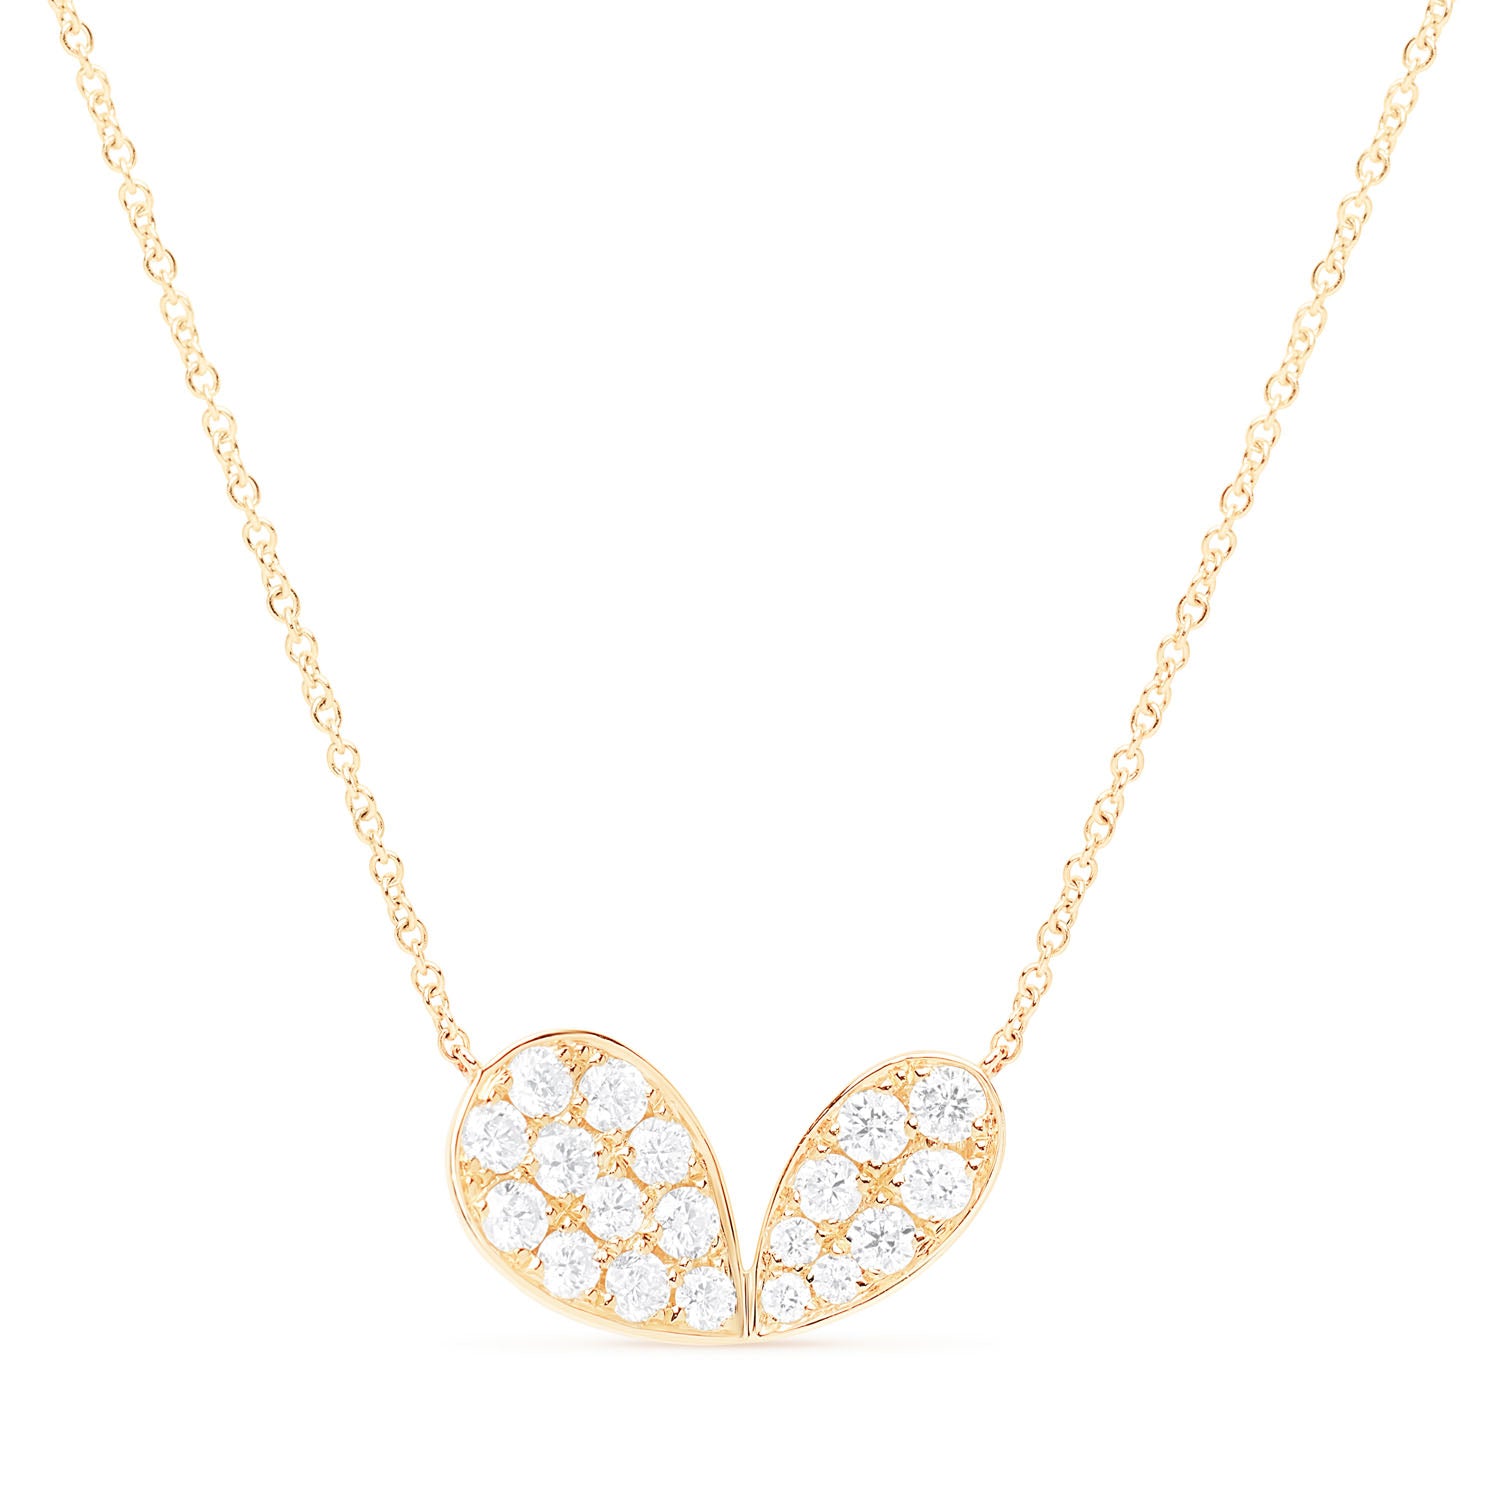 Whispers of Love Maxi Necklace - Yellow Gold